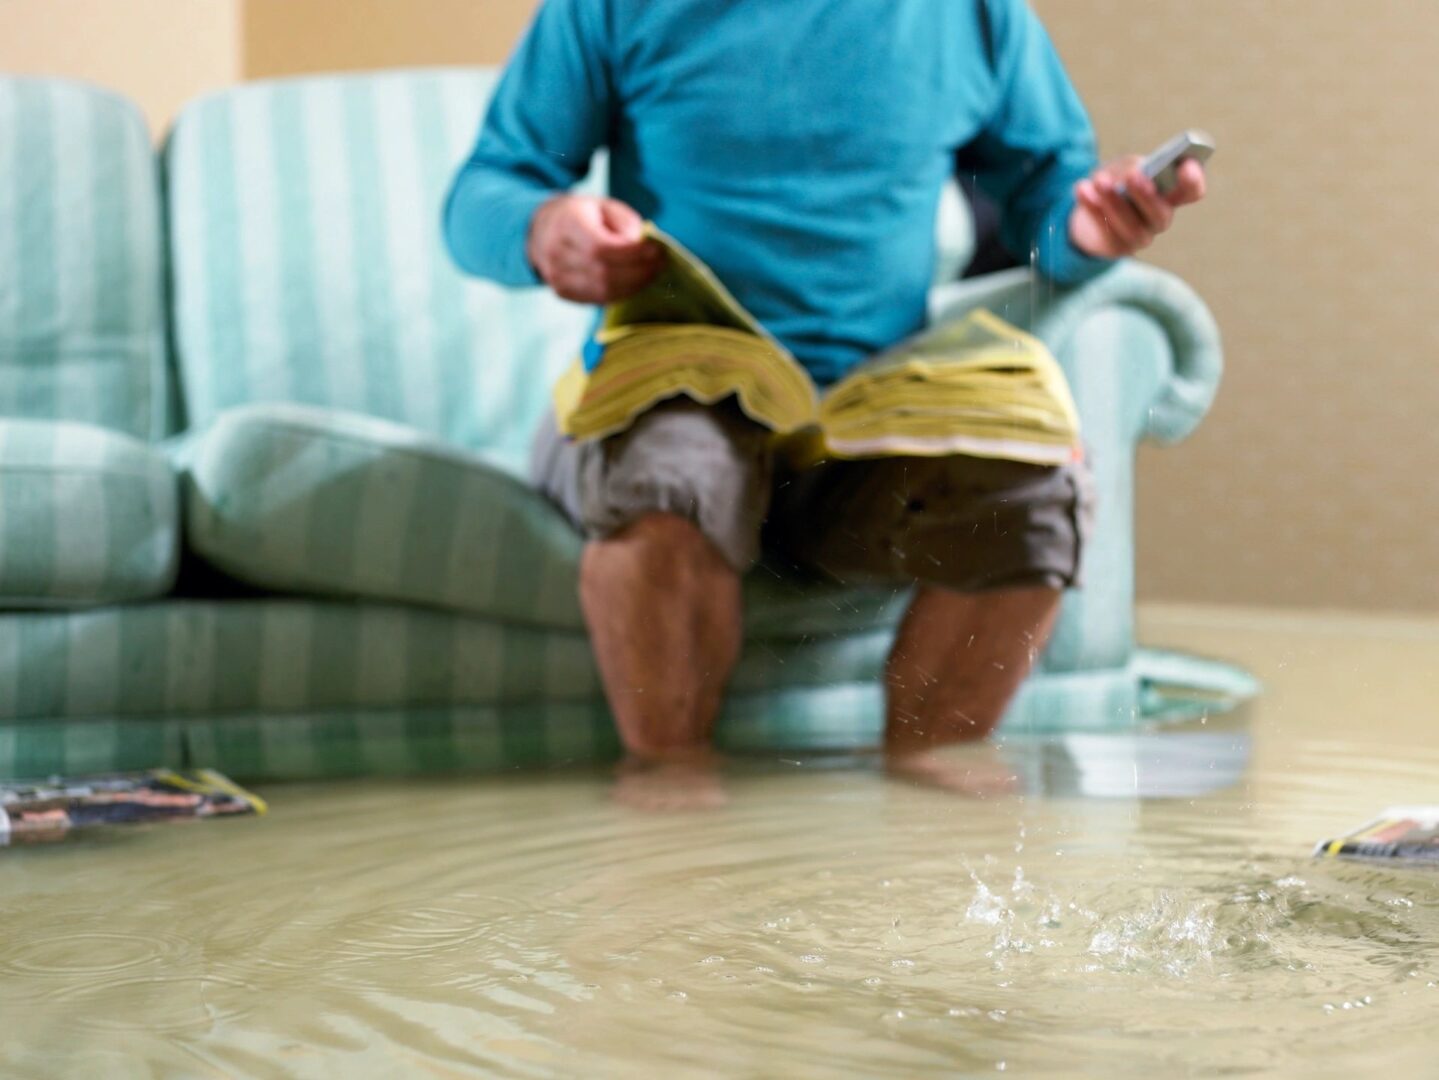 Man sitting on a striped couch while holding a wet book in a flooded room